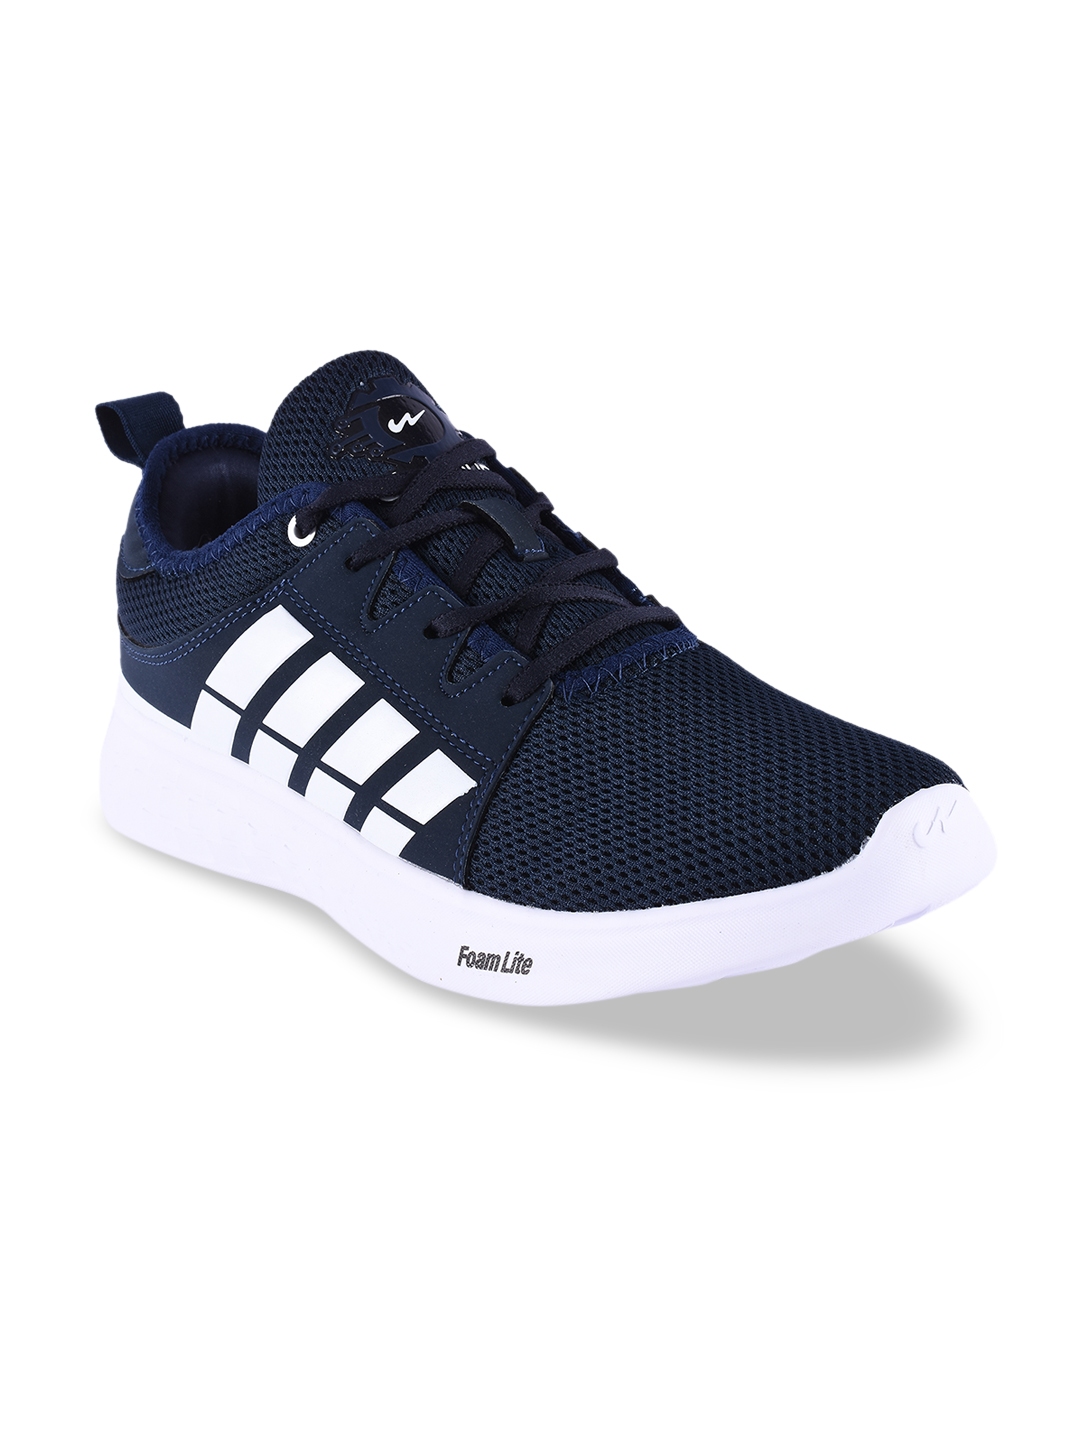 Buy Campus Men Navy Blue Running Shoes - Sports Shoes for Men 9526375 ...